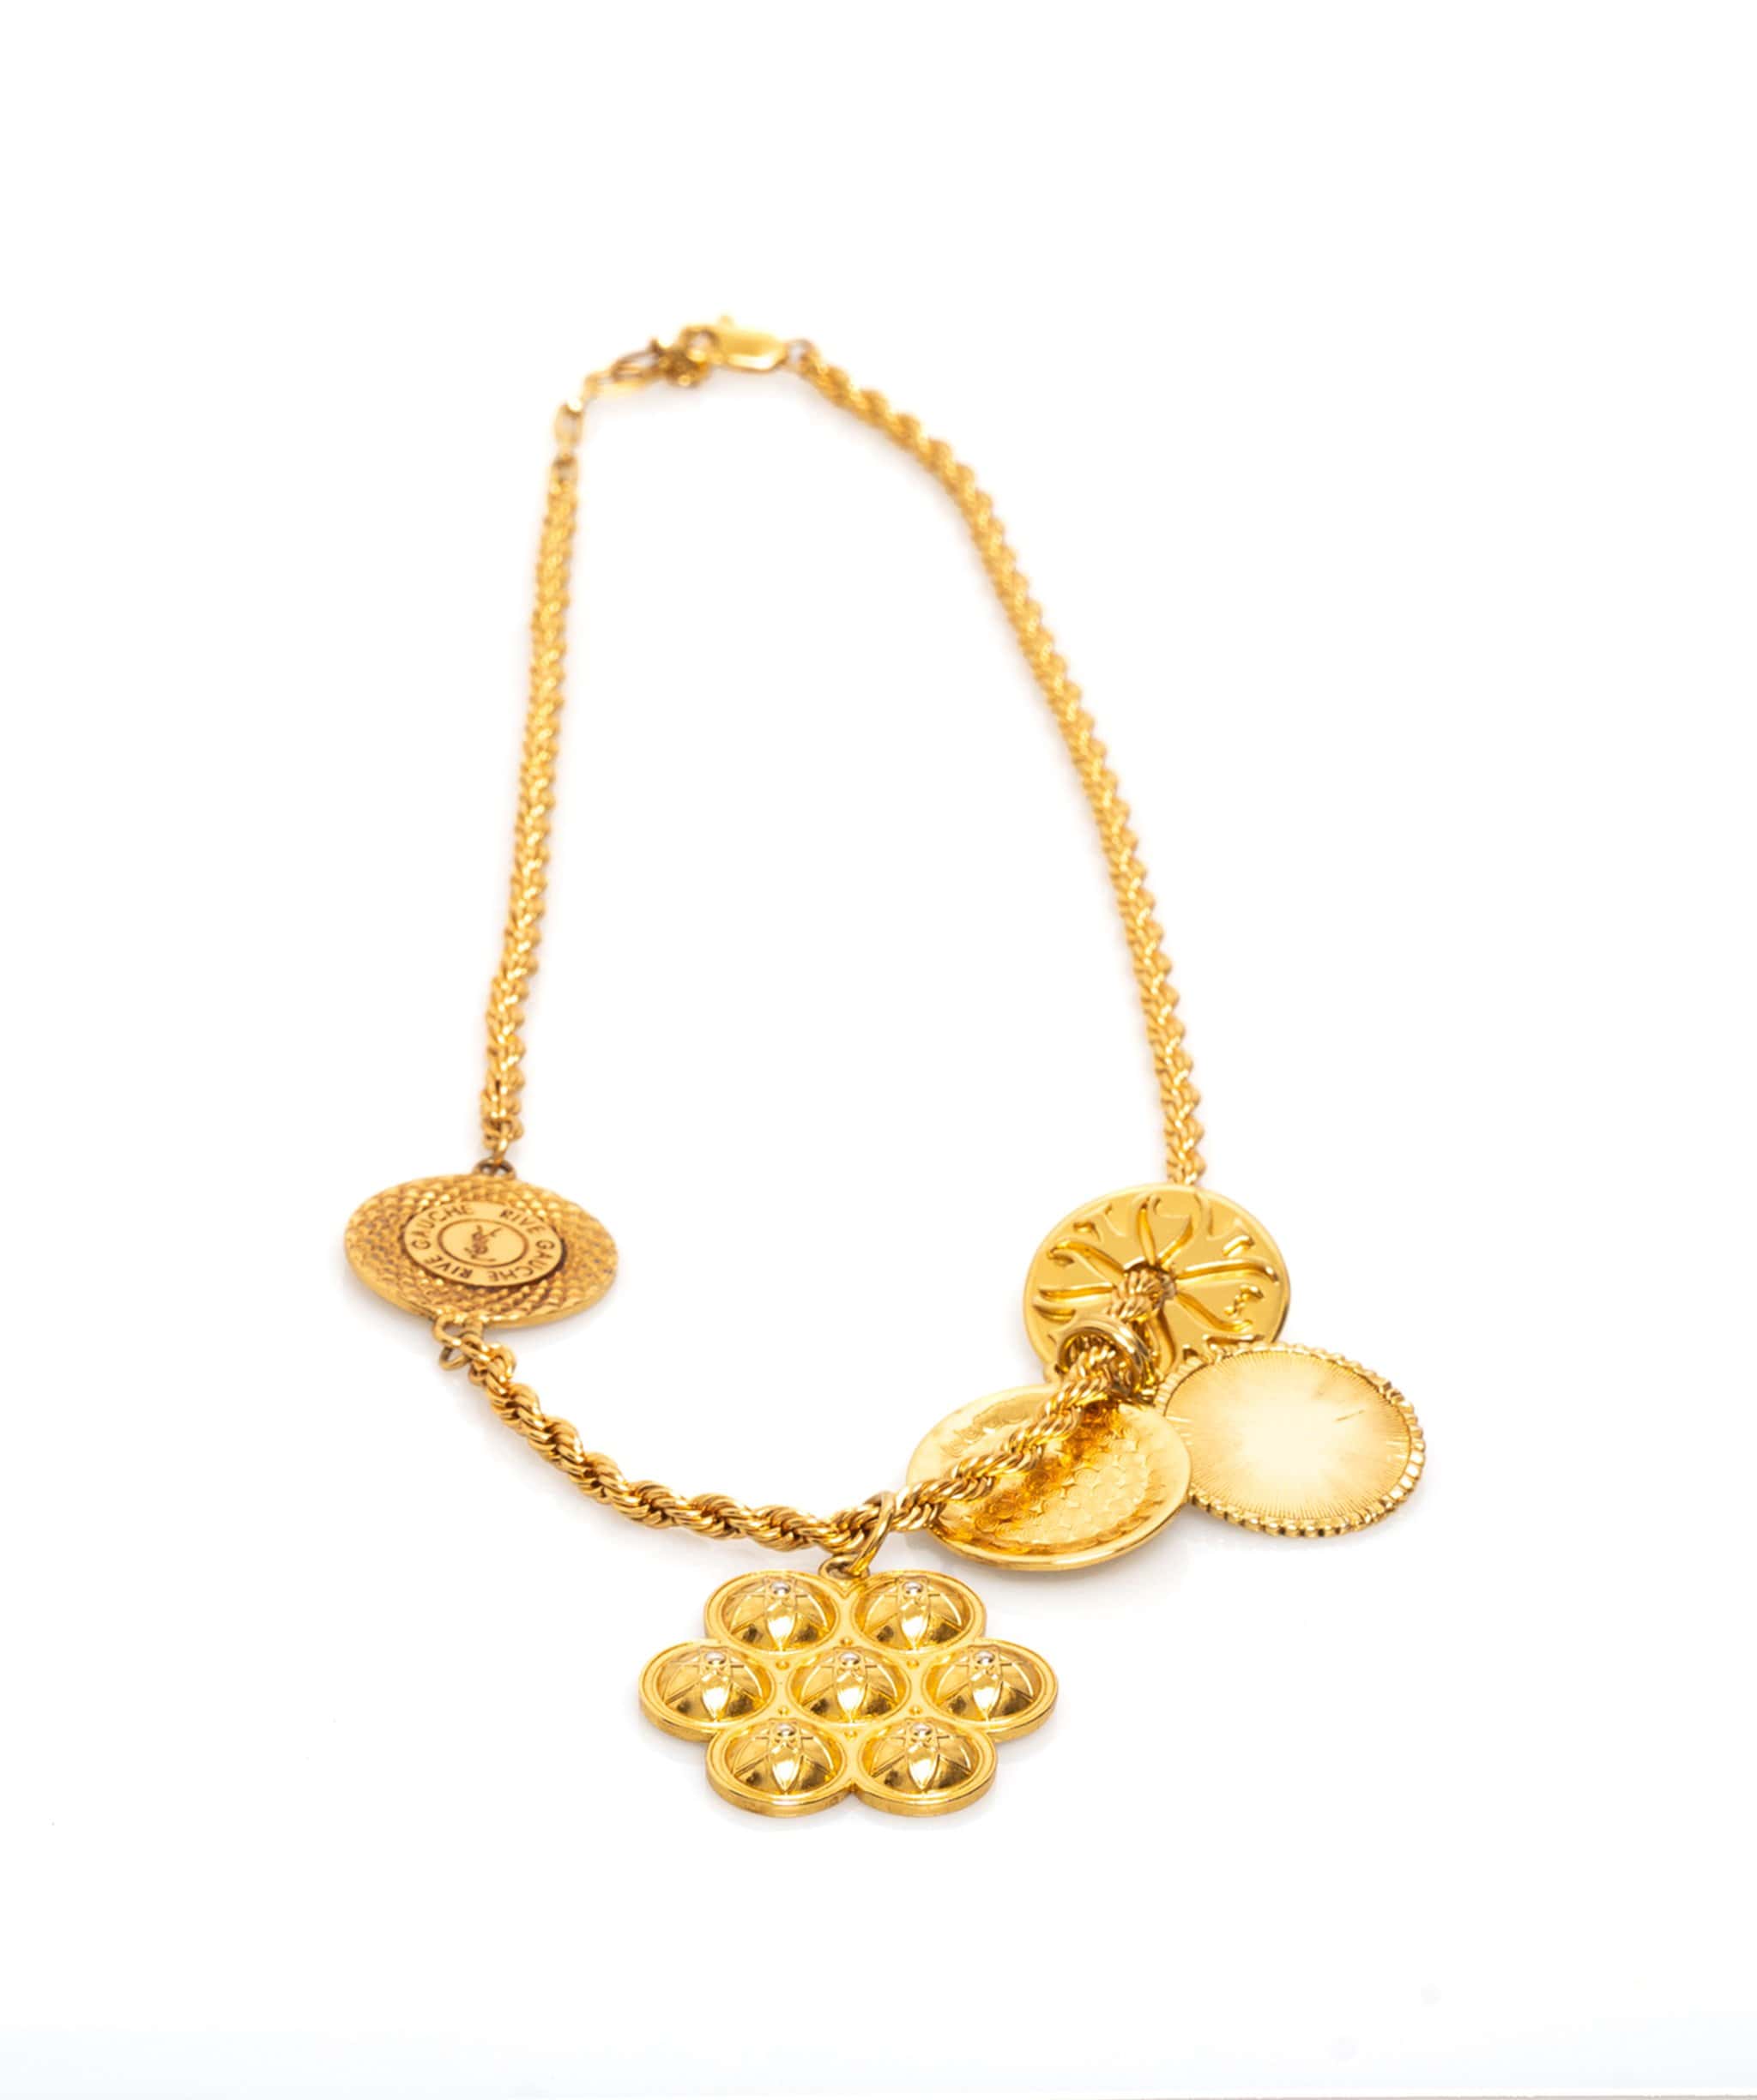 Yves Saint Laurent YSL Rive gauche Gold coin necklace - AWL1254